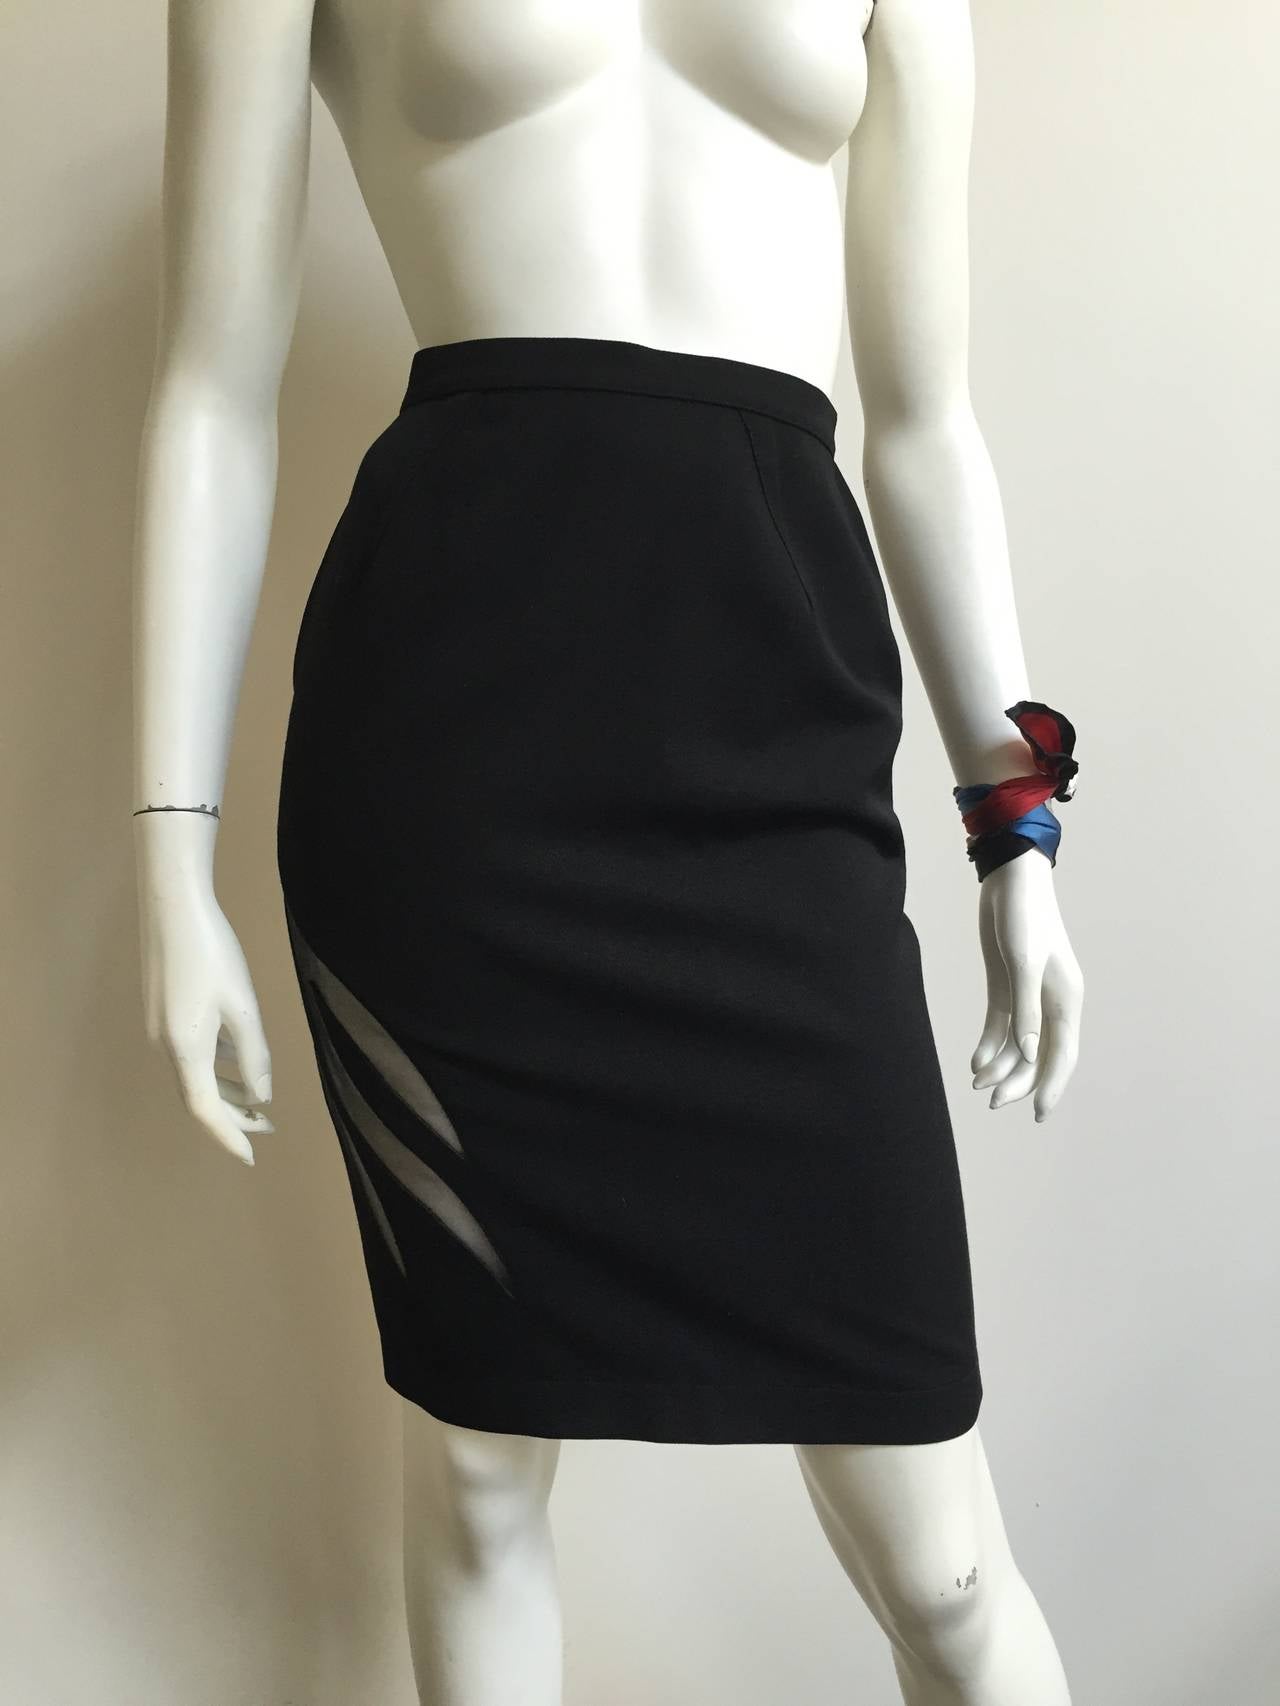 Thierry Mugler 80s flame cut out pencil skirt size 4. 5